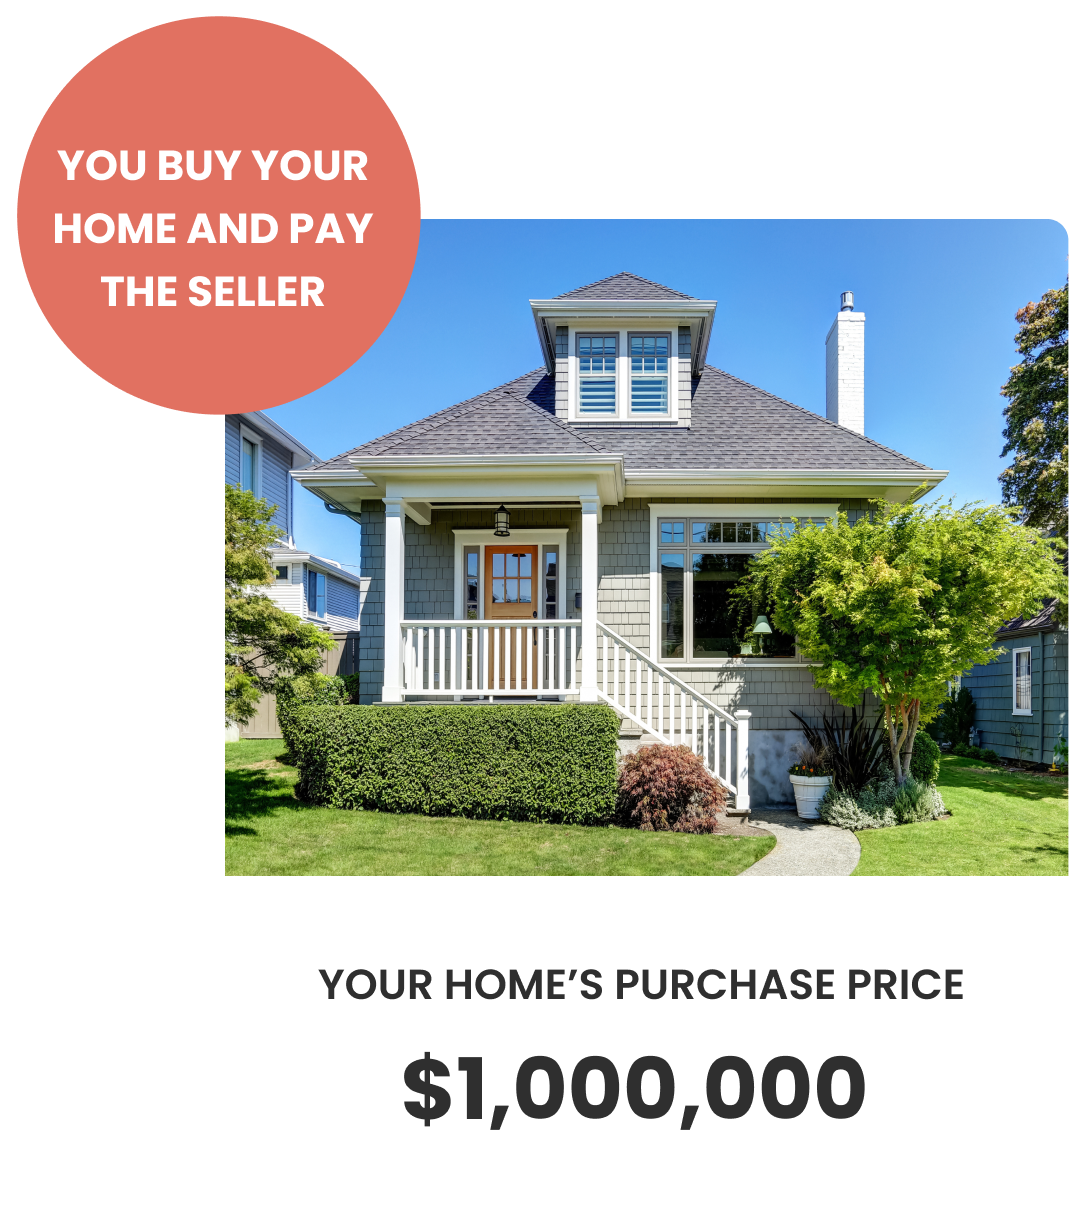 You buy your home and pay the seller